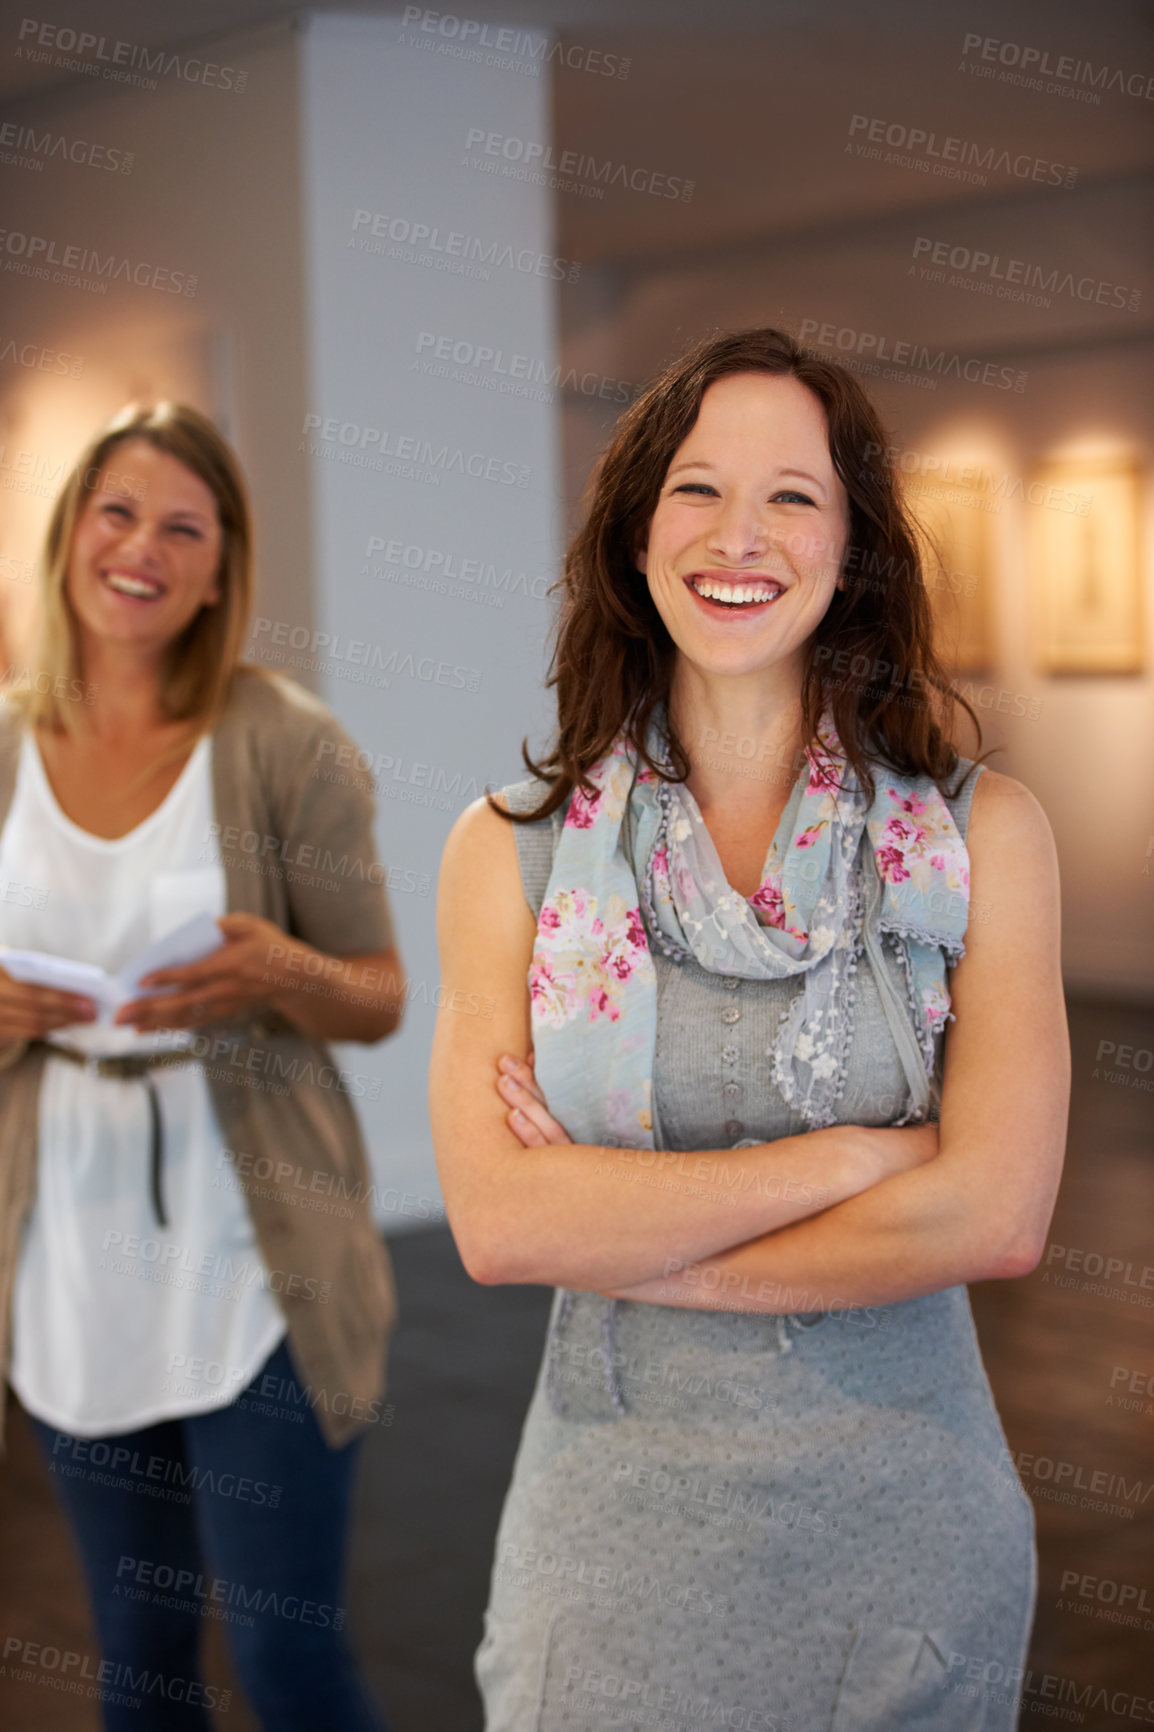 Buy stock photo Smile, arms crossed and portrait of a woman with pride in art, exhibition and work at a gallery. Happy, learning and a museum manager or employee at a job for creativity, teaching and culture